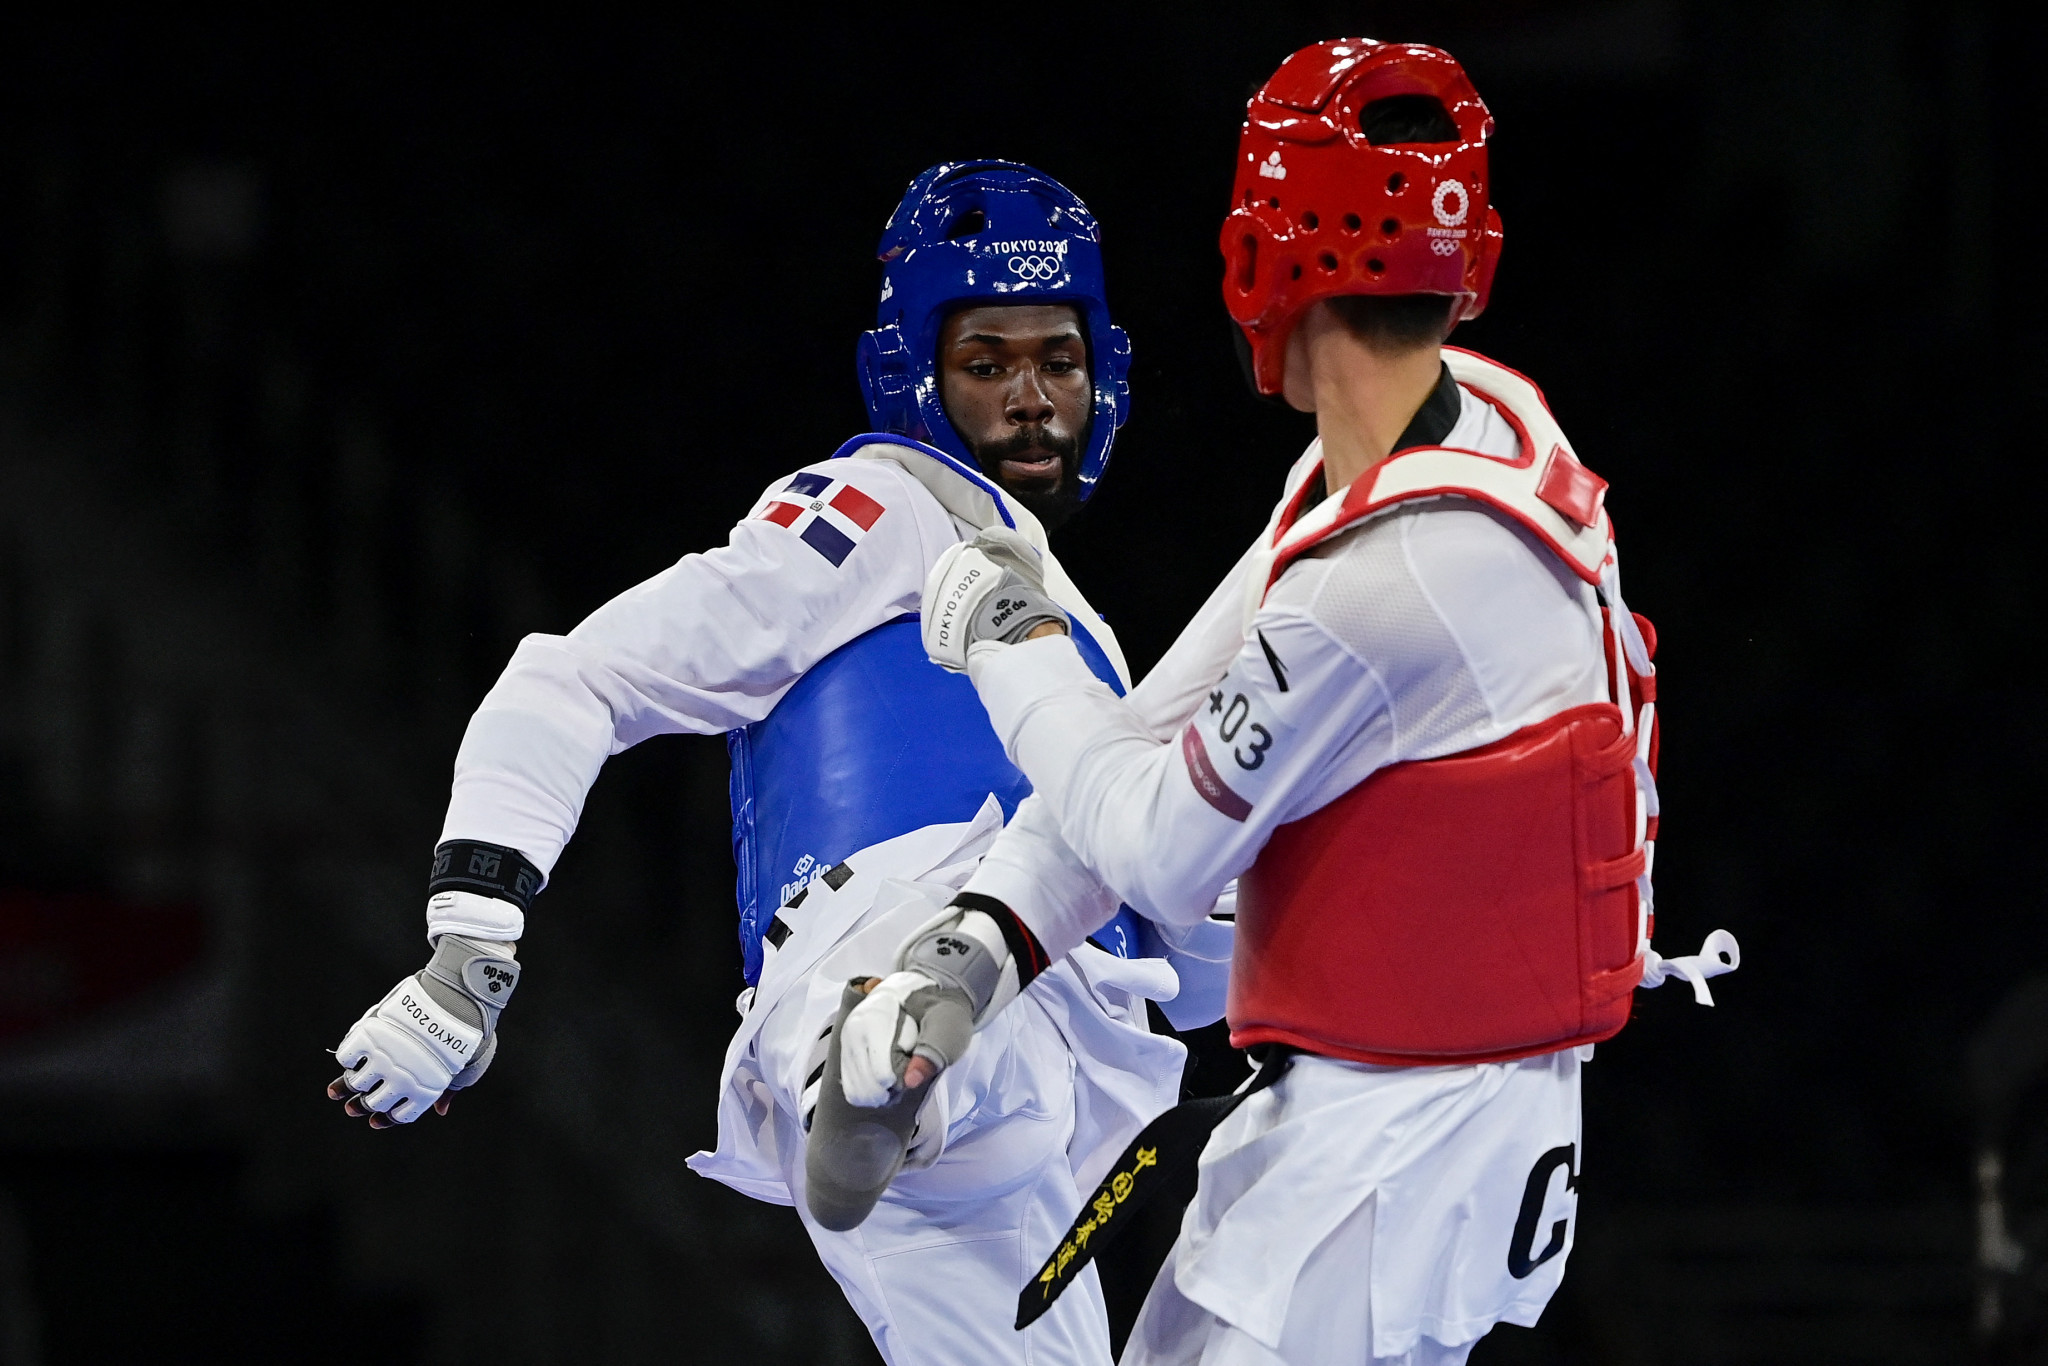 Pié earns home gold for hosts at Pan American Taekwondo Championships